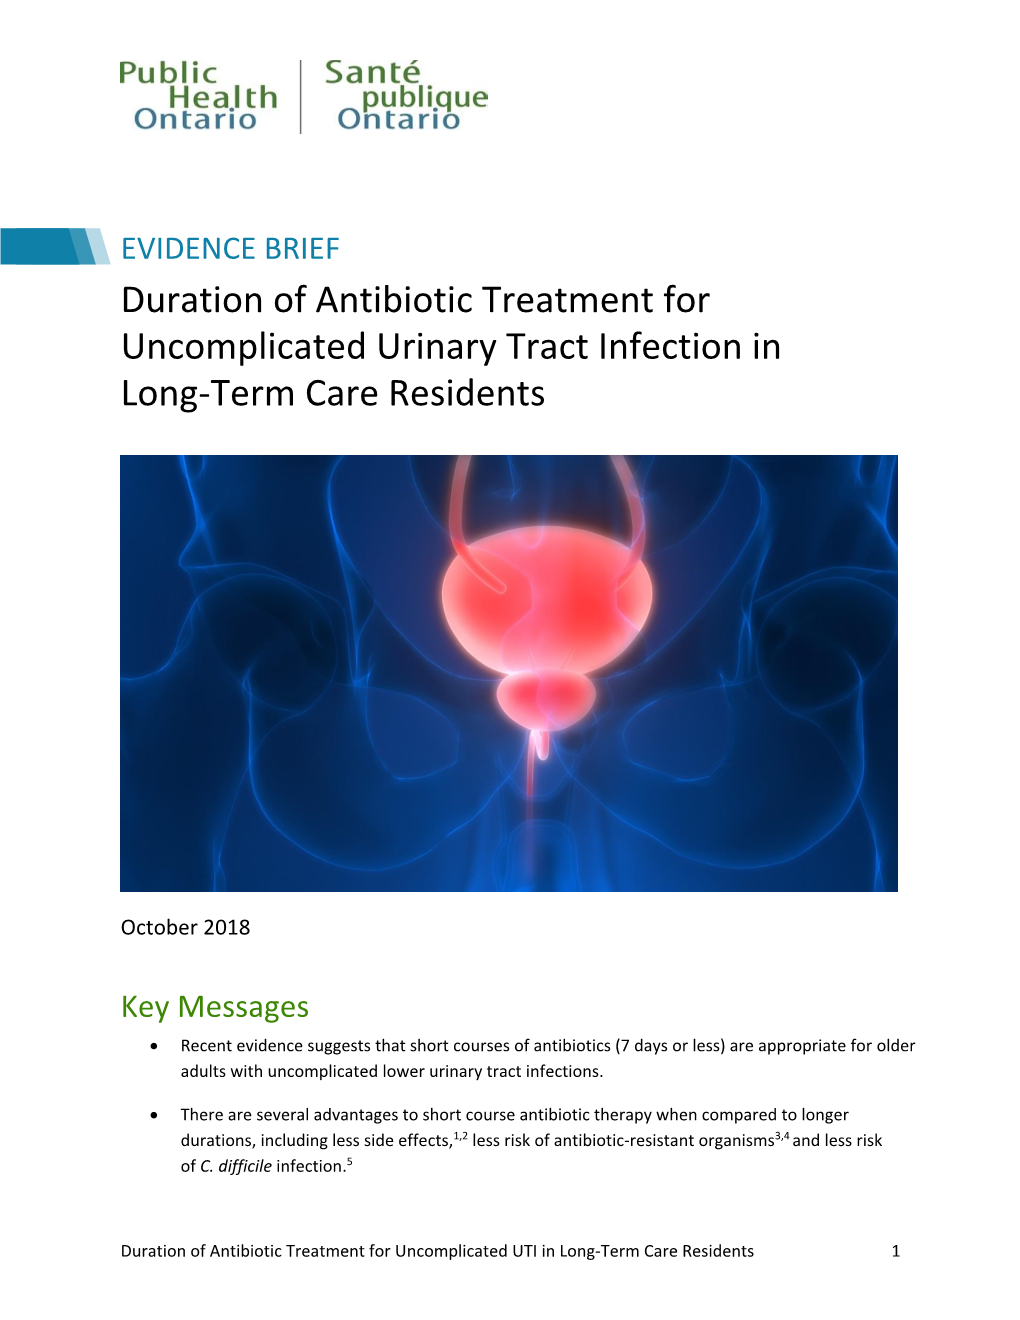 Duration of Antibiotic Treatment for Uncomplicated Urinary Tract Infection in Long-Term Care Residents